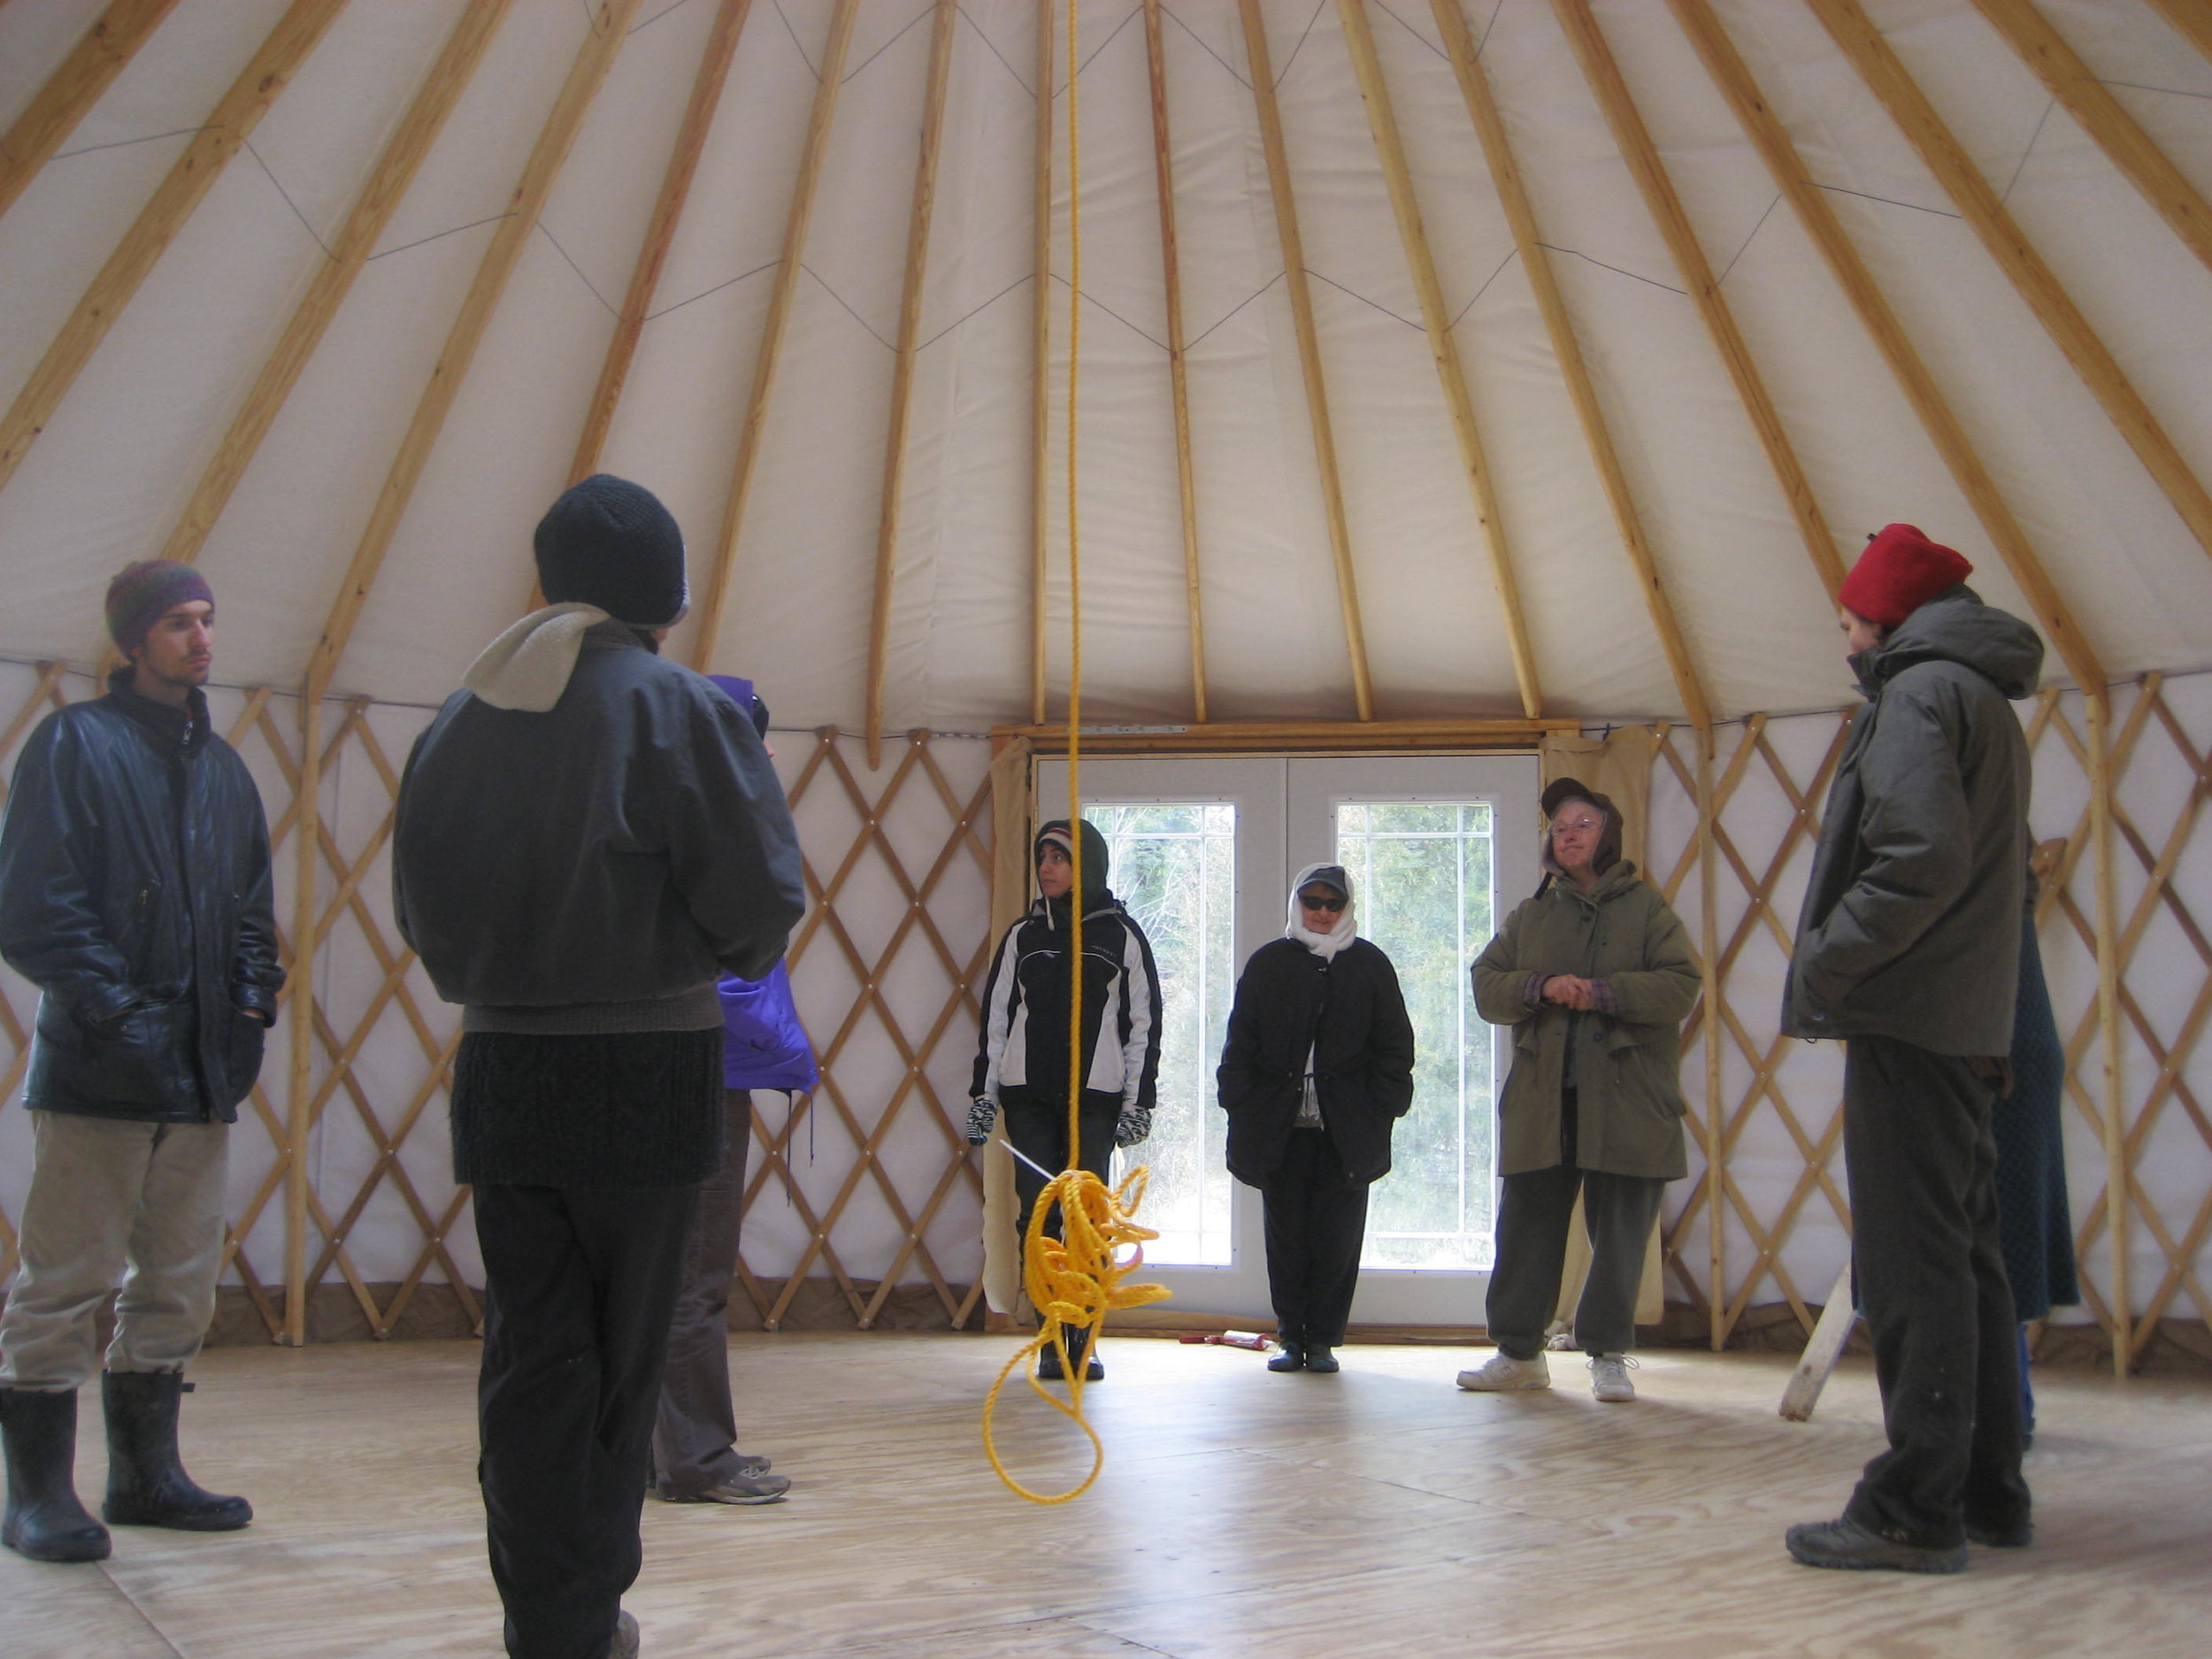 Students learning about Yurts at Greensleeves Farm